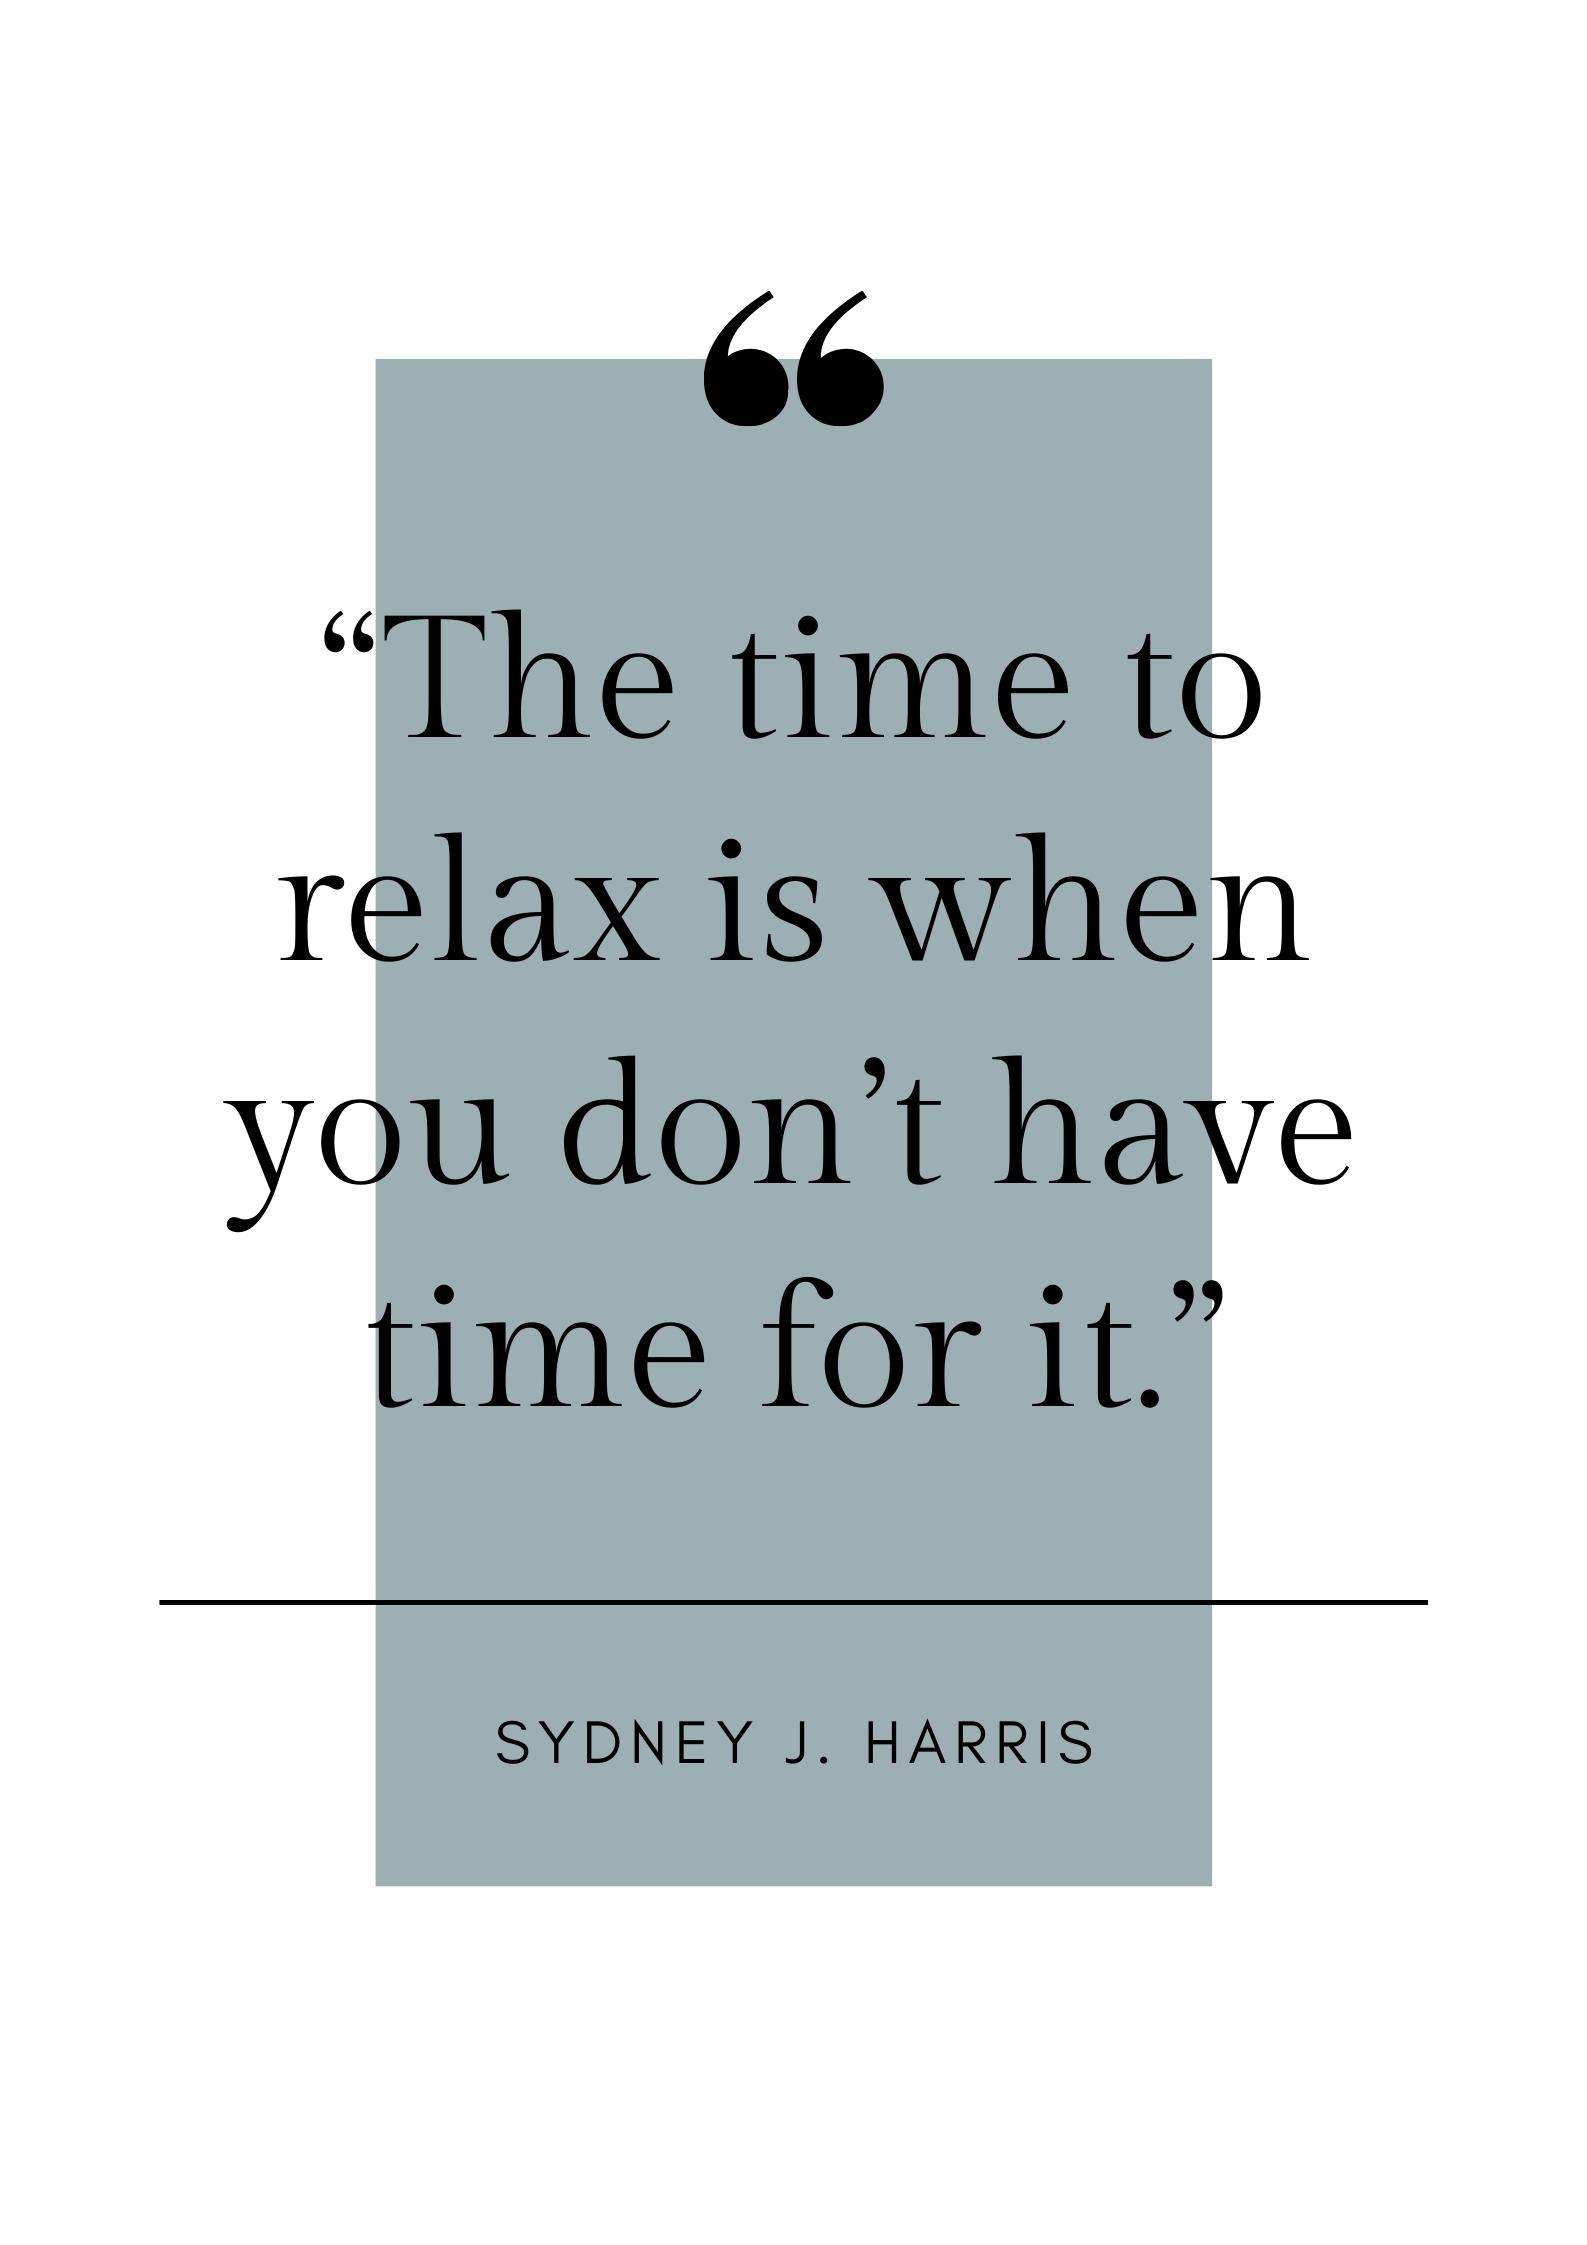 funny relaxation quote